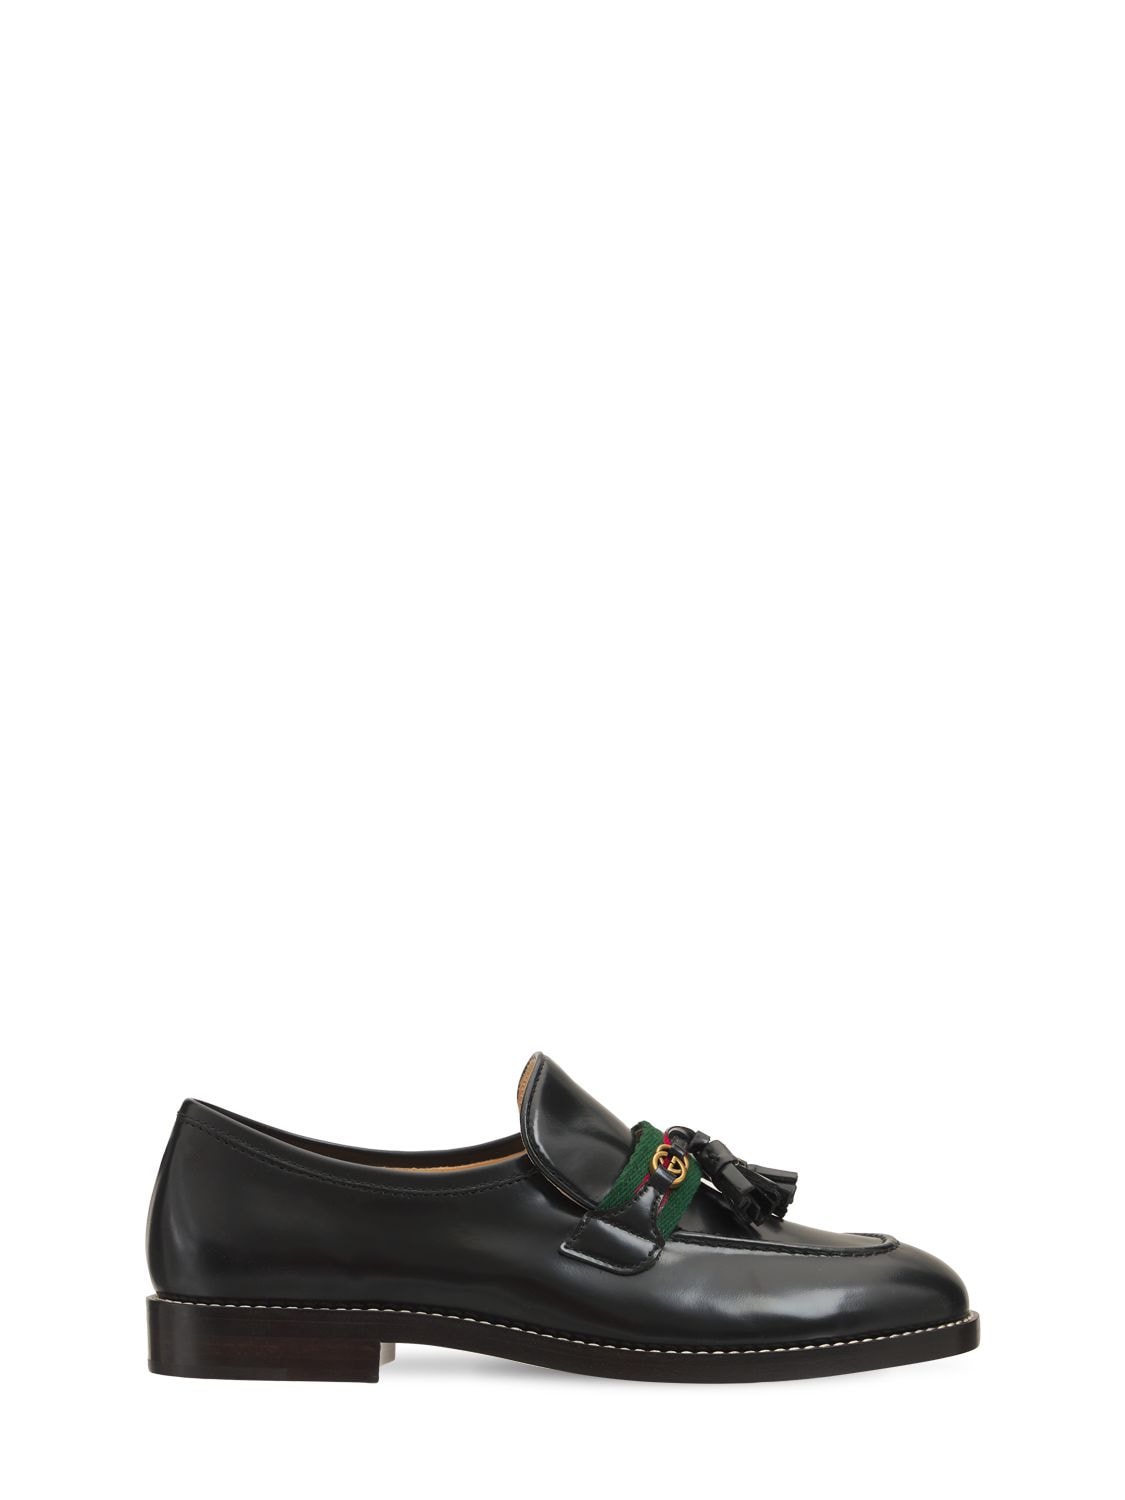 20mm Web Patent Leather Loafers